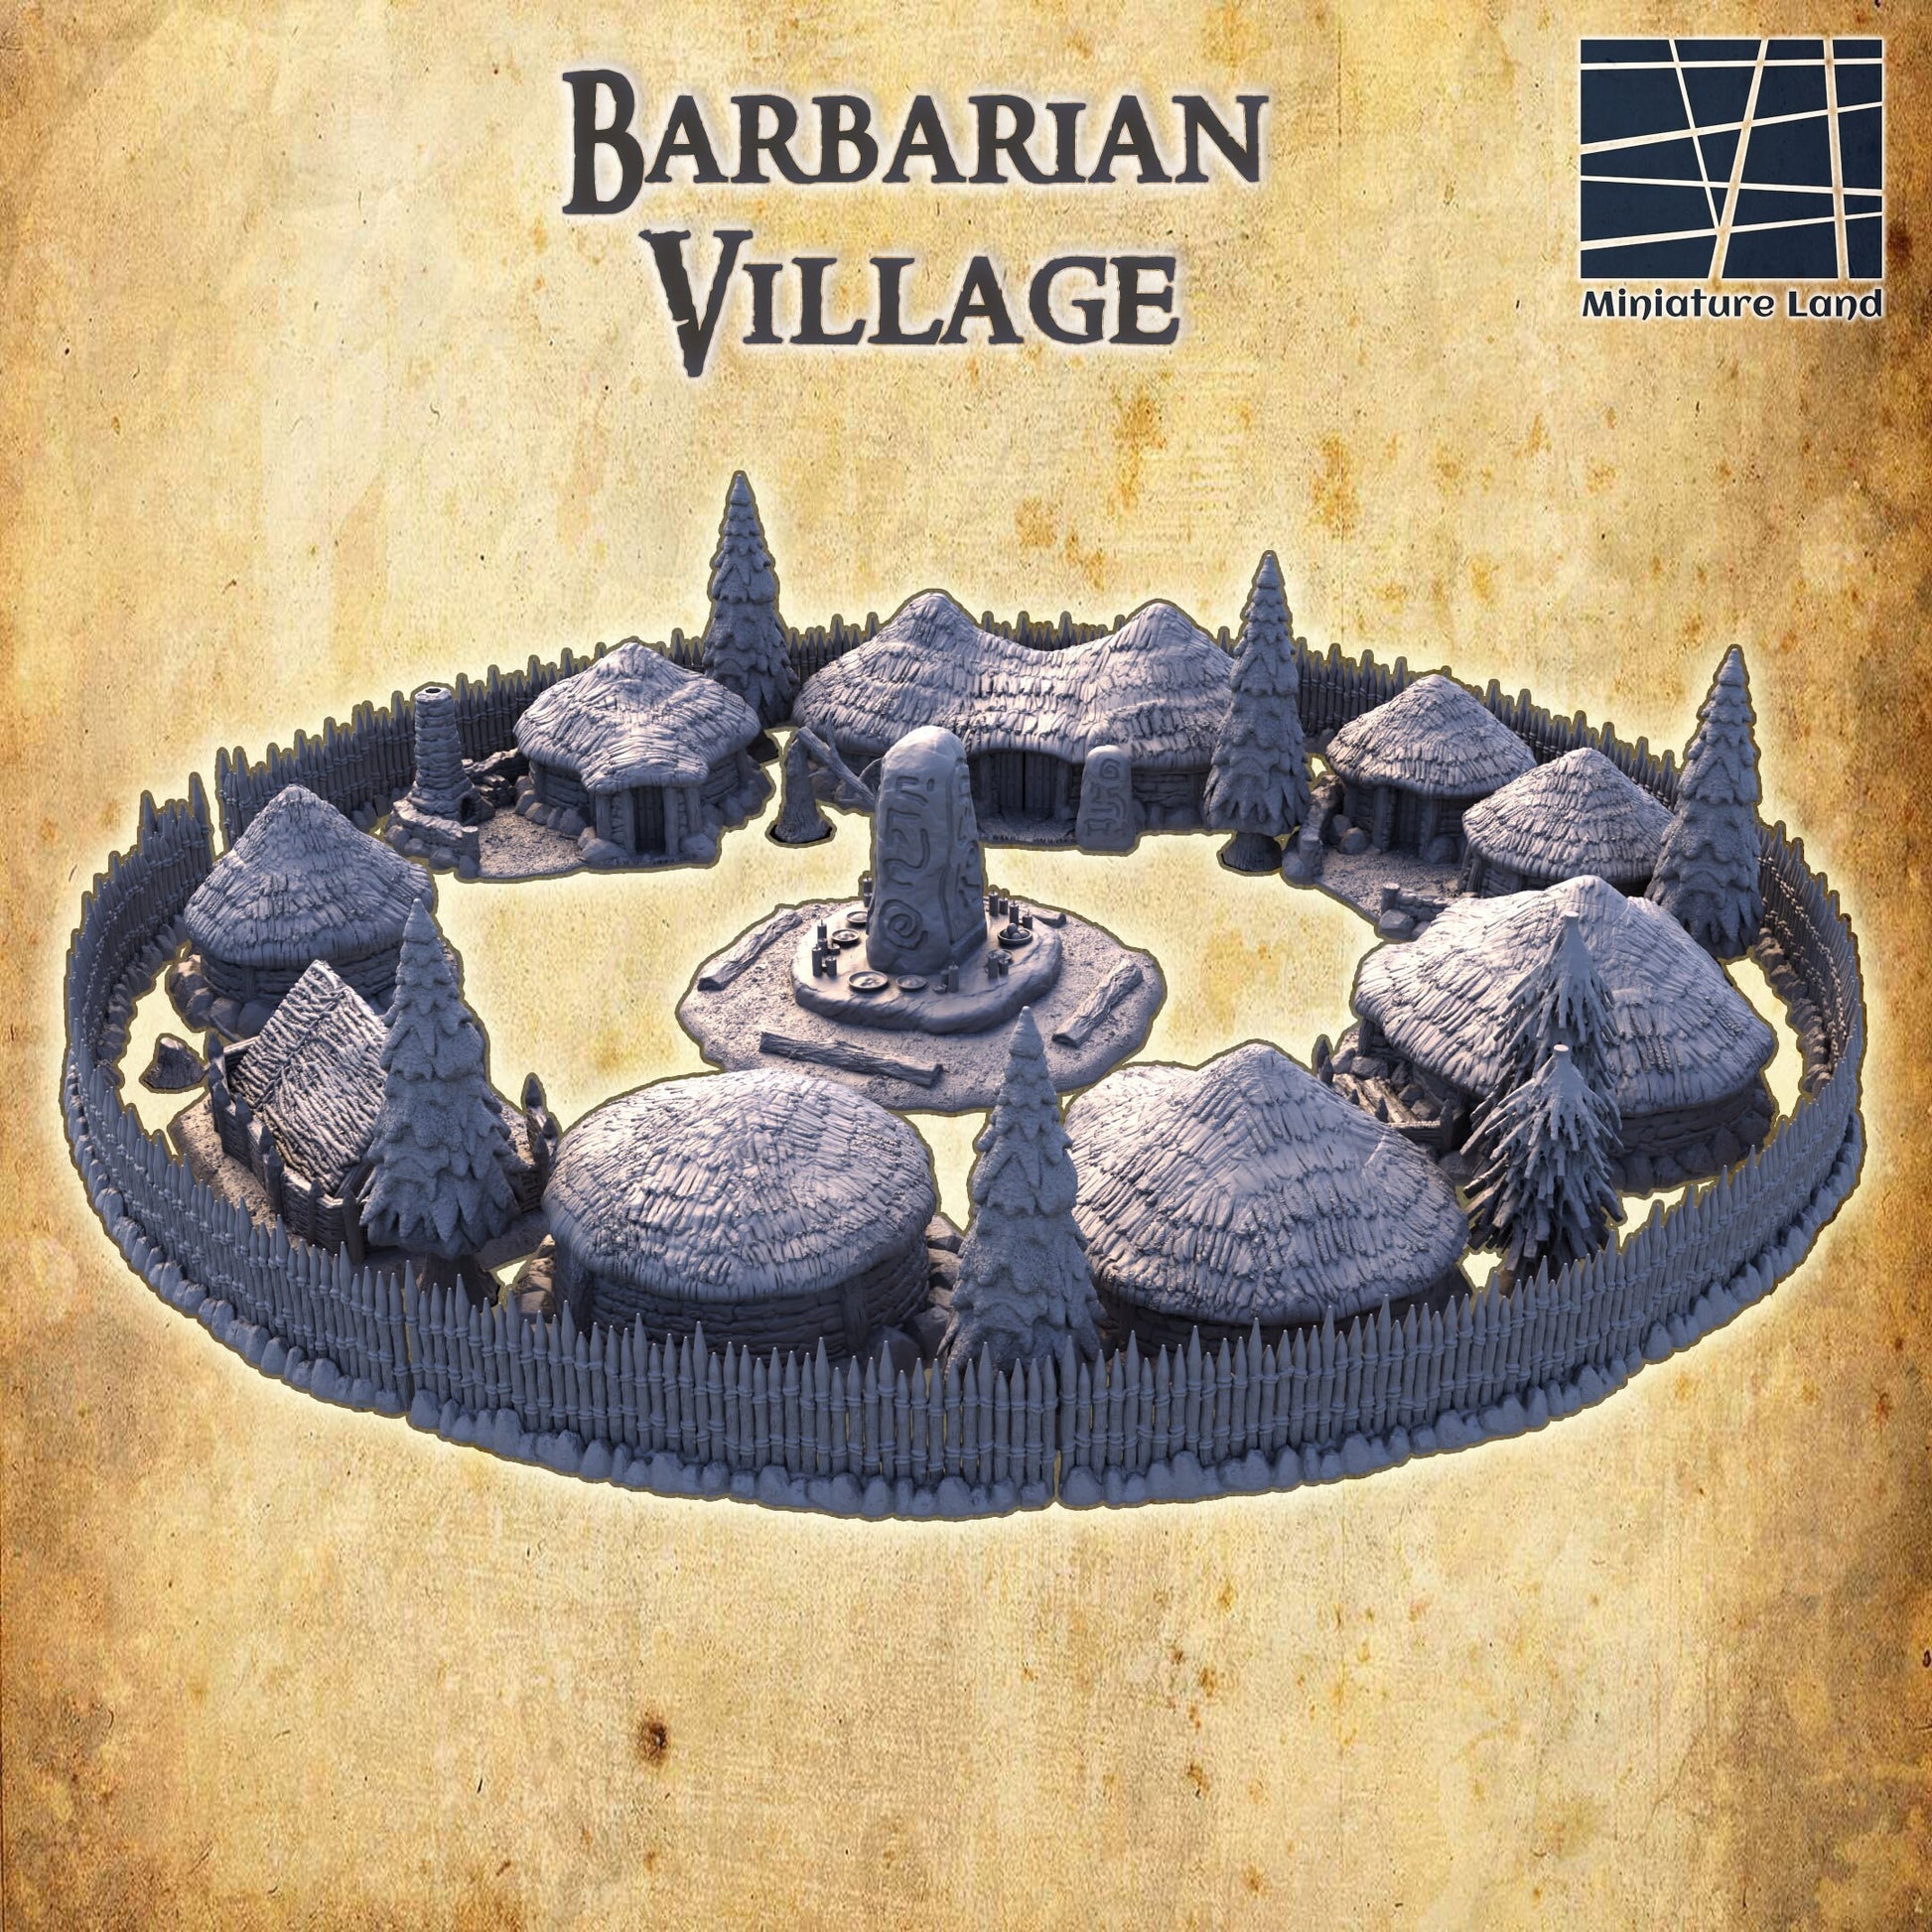 Tabletop Terrain, Mordheim, D&D, Pirate, Tower, Ruin, Ruined, houses, Tabletop, Fantasy Terrain, Town Set, Town and Market, Mordheim Set, Wargaming, Dungeons and Dragons,Barbarian, RPG Set, Village Set, Chaos, small town, Market, town